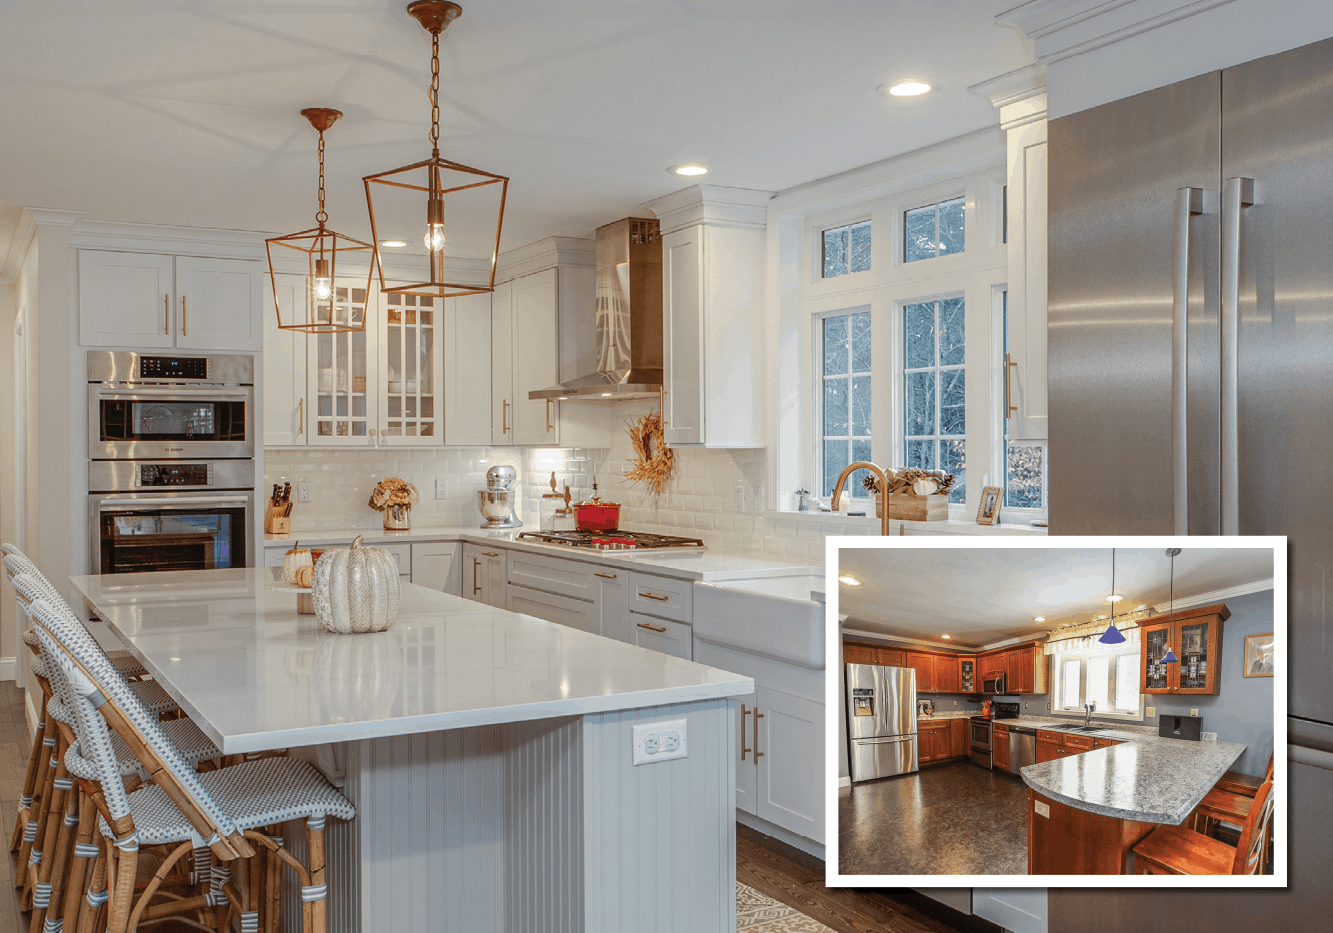 Kitchen Remodel Cost Guide 2021